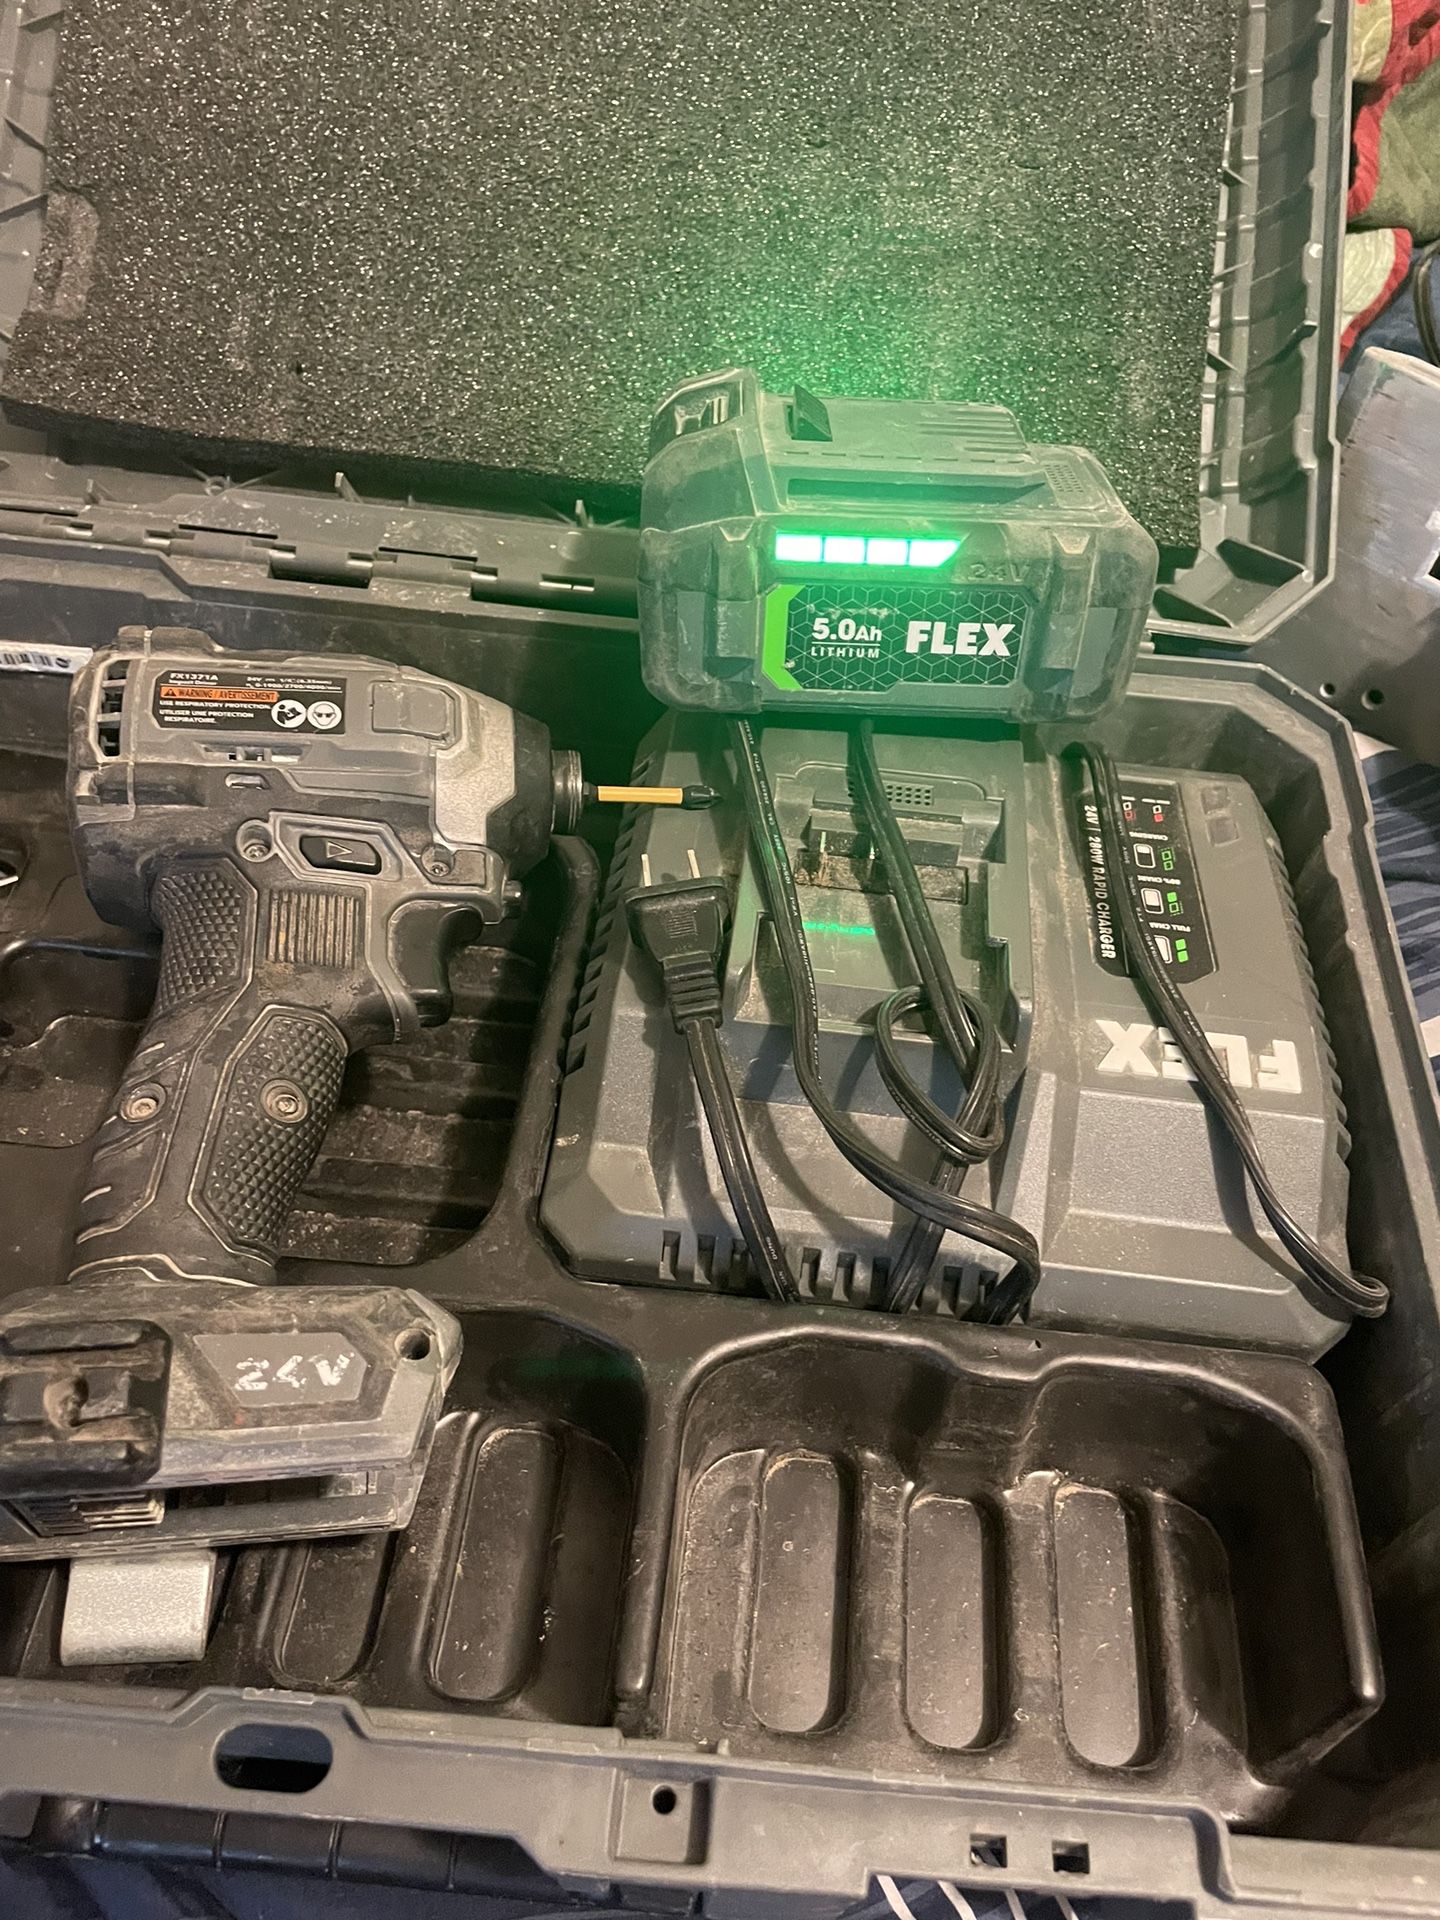 Flex 24v Impact With Gears, 5amp Battery And Charger And Case.